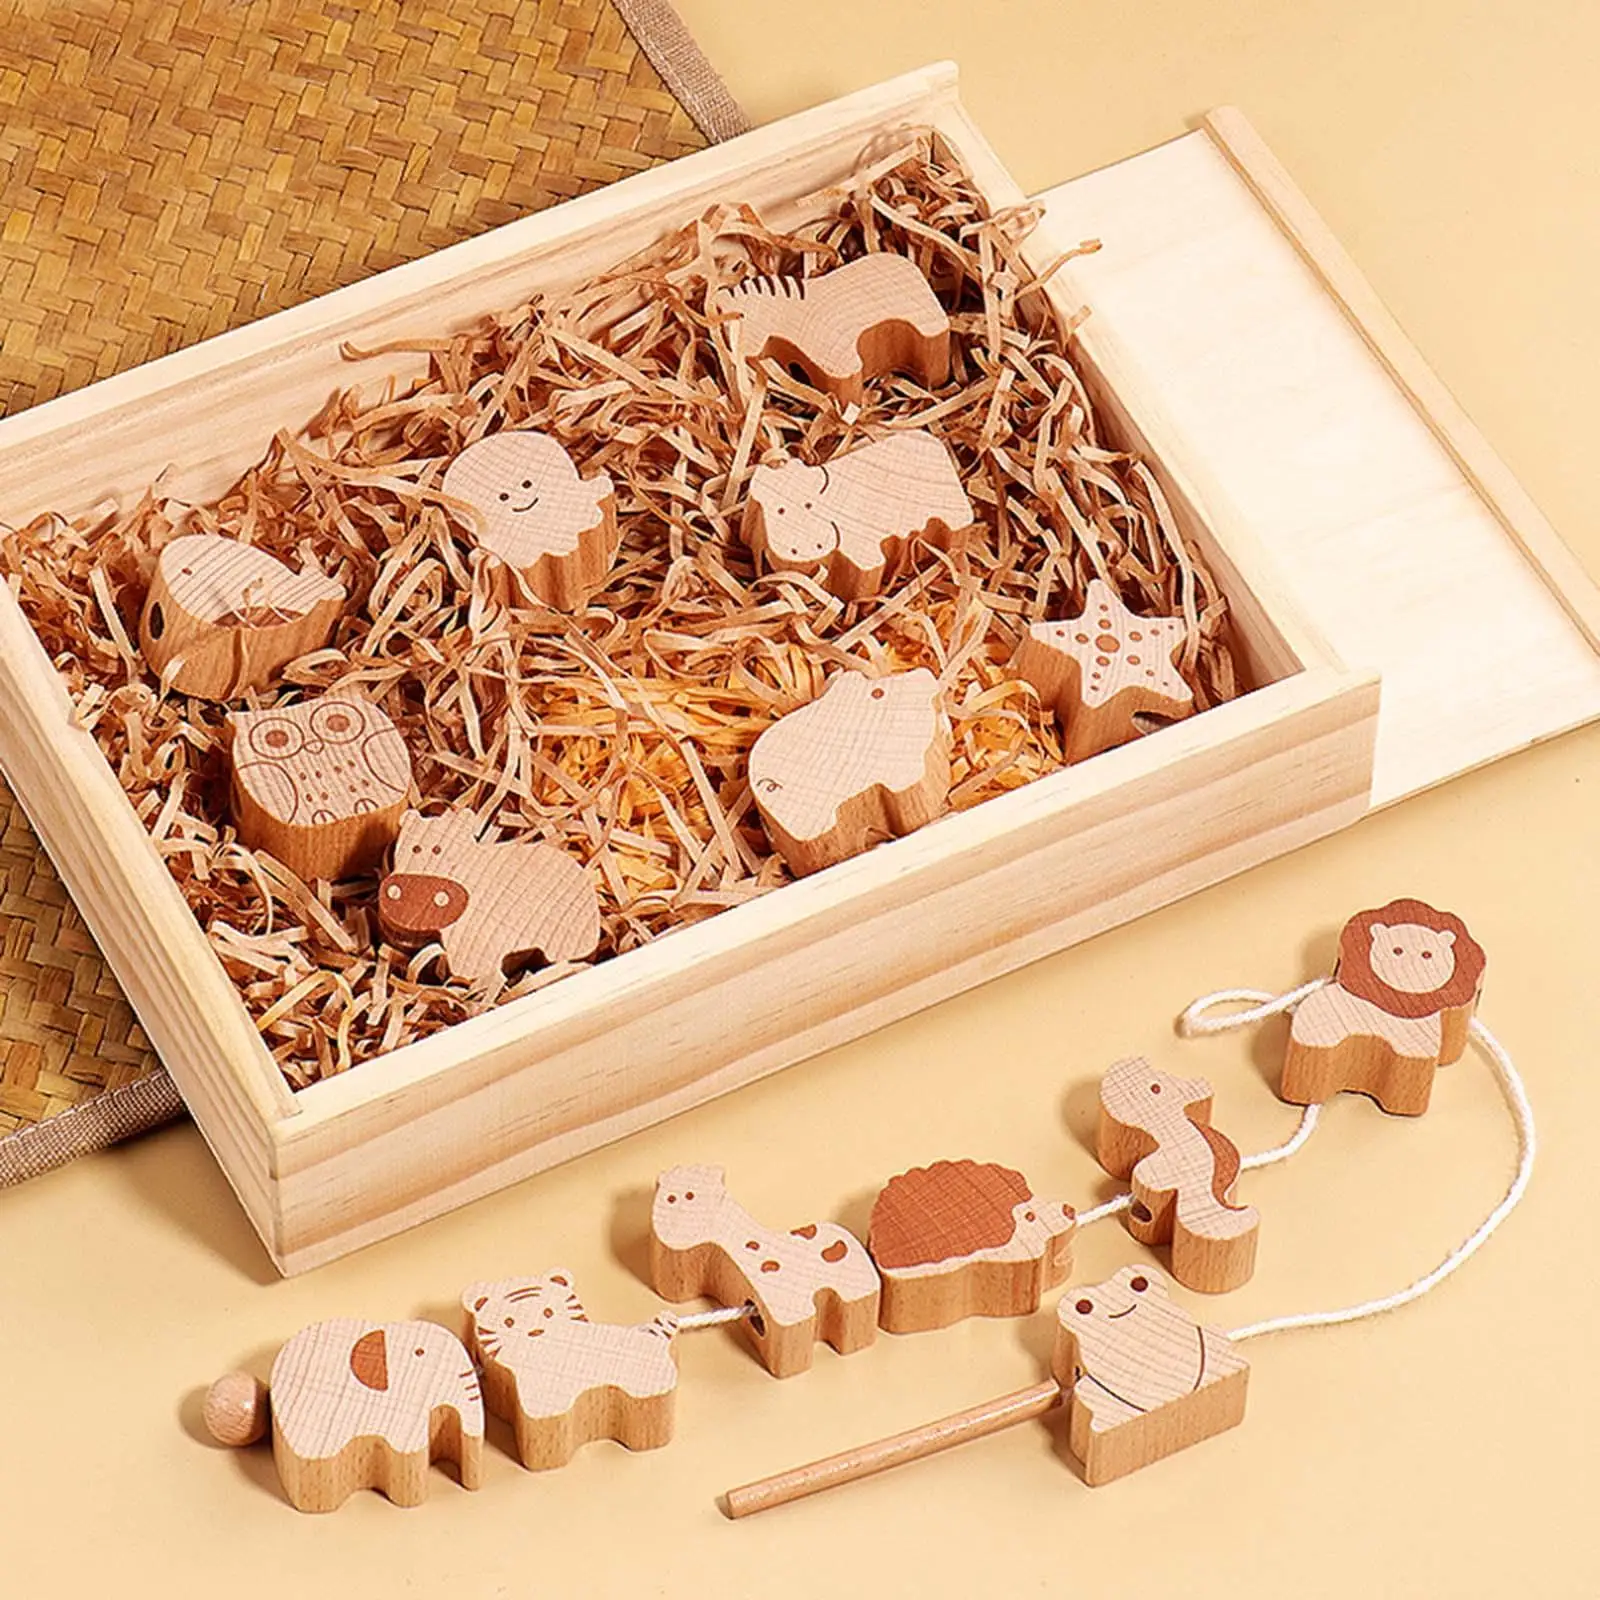 16Pcs Animal Blocks Threading Toy Fine Motor Skill for Ages 3 4 5 Years Old